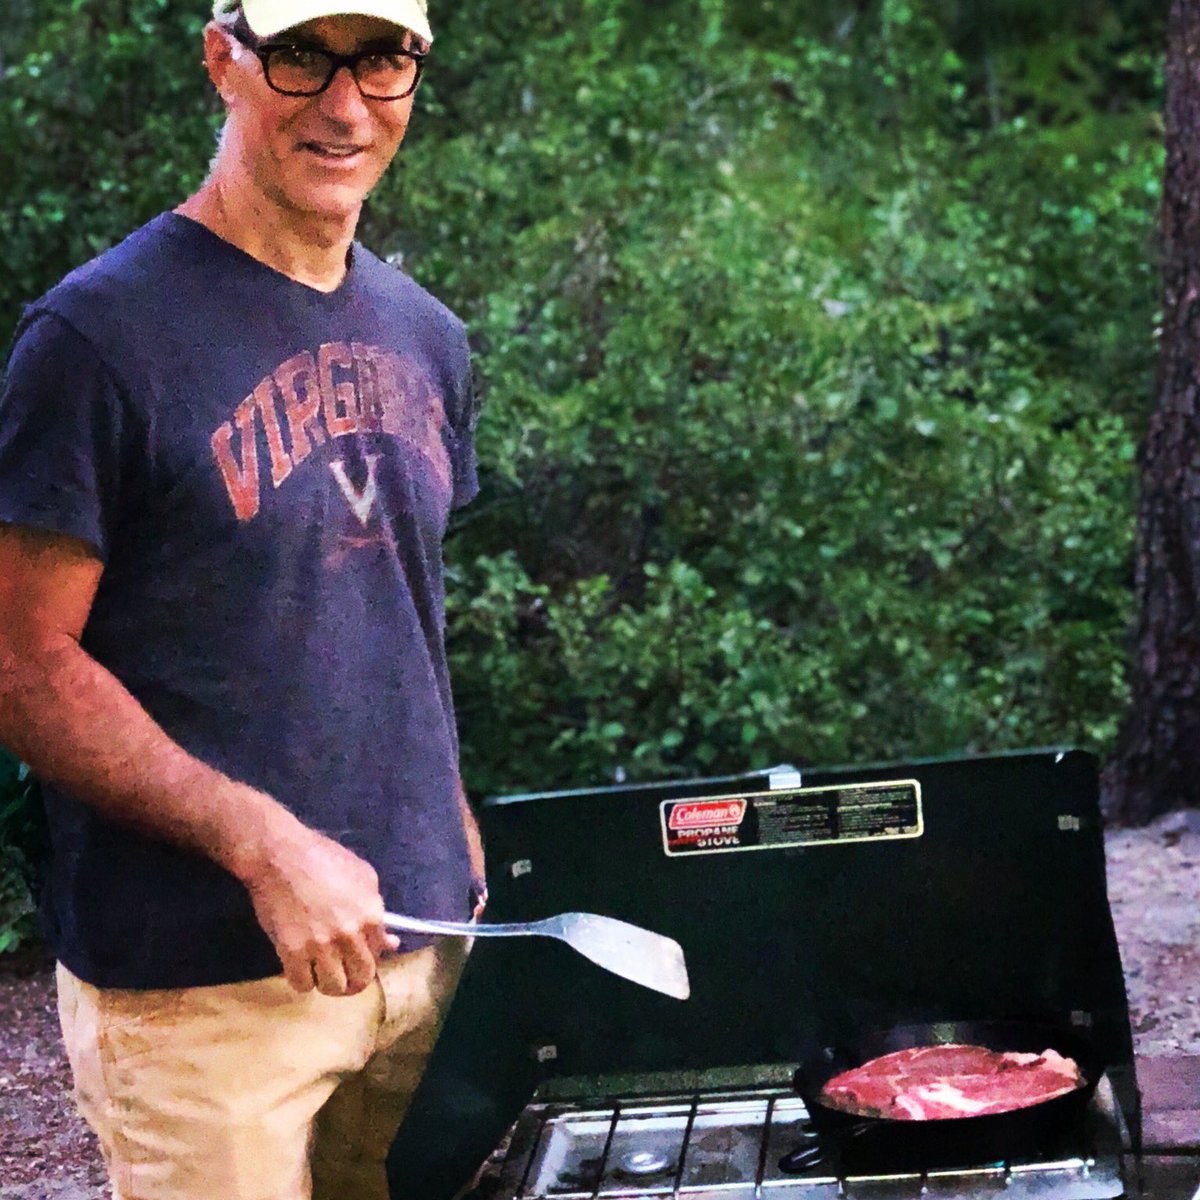 Cooking up 2 pounds of ribeyes at my campsite after a long day of hiking. 
#PoorManSteroids #Superfood #performancefood #NSNG #campfood #hiking #redmeat #ribeyesteak #greatoutdoors #nutrition